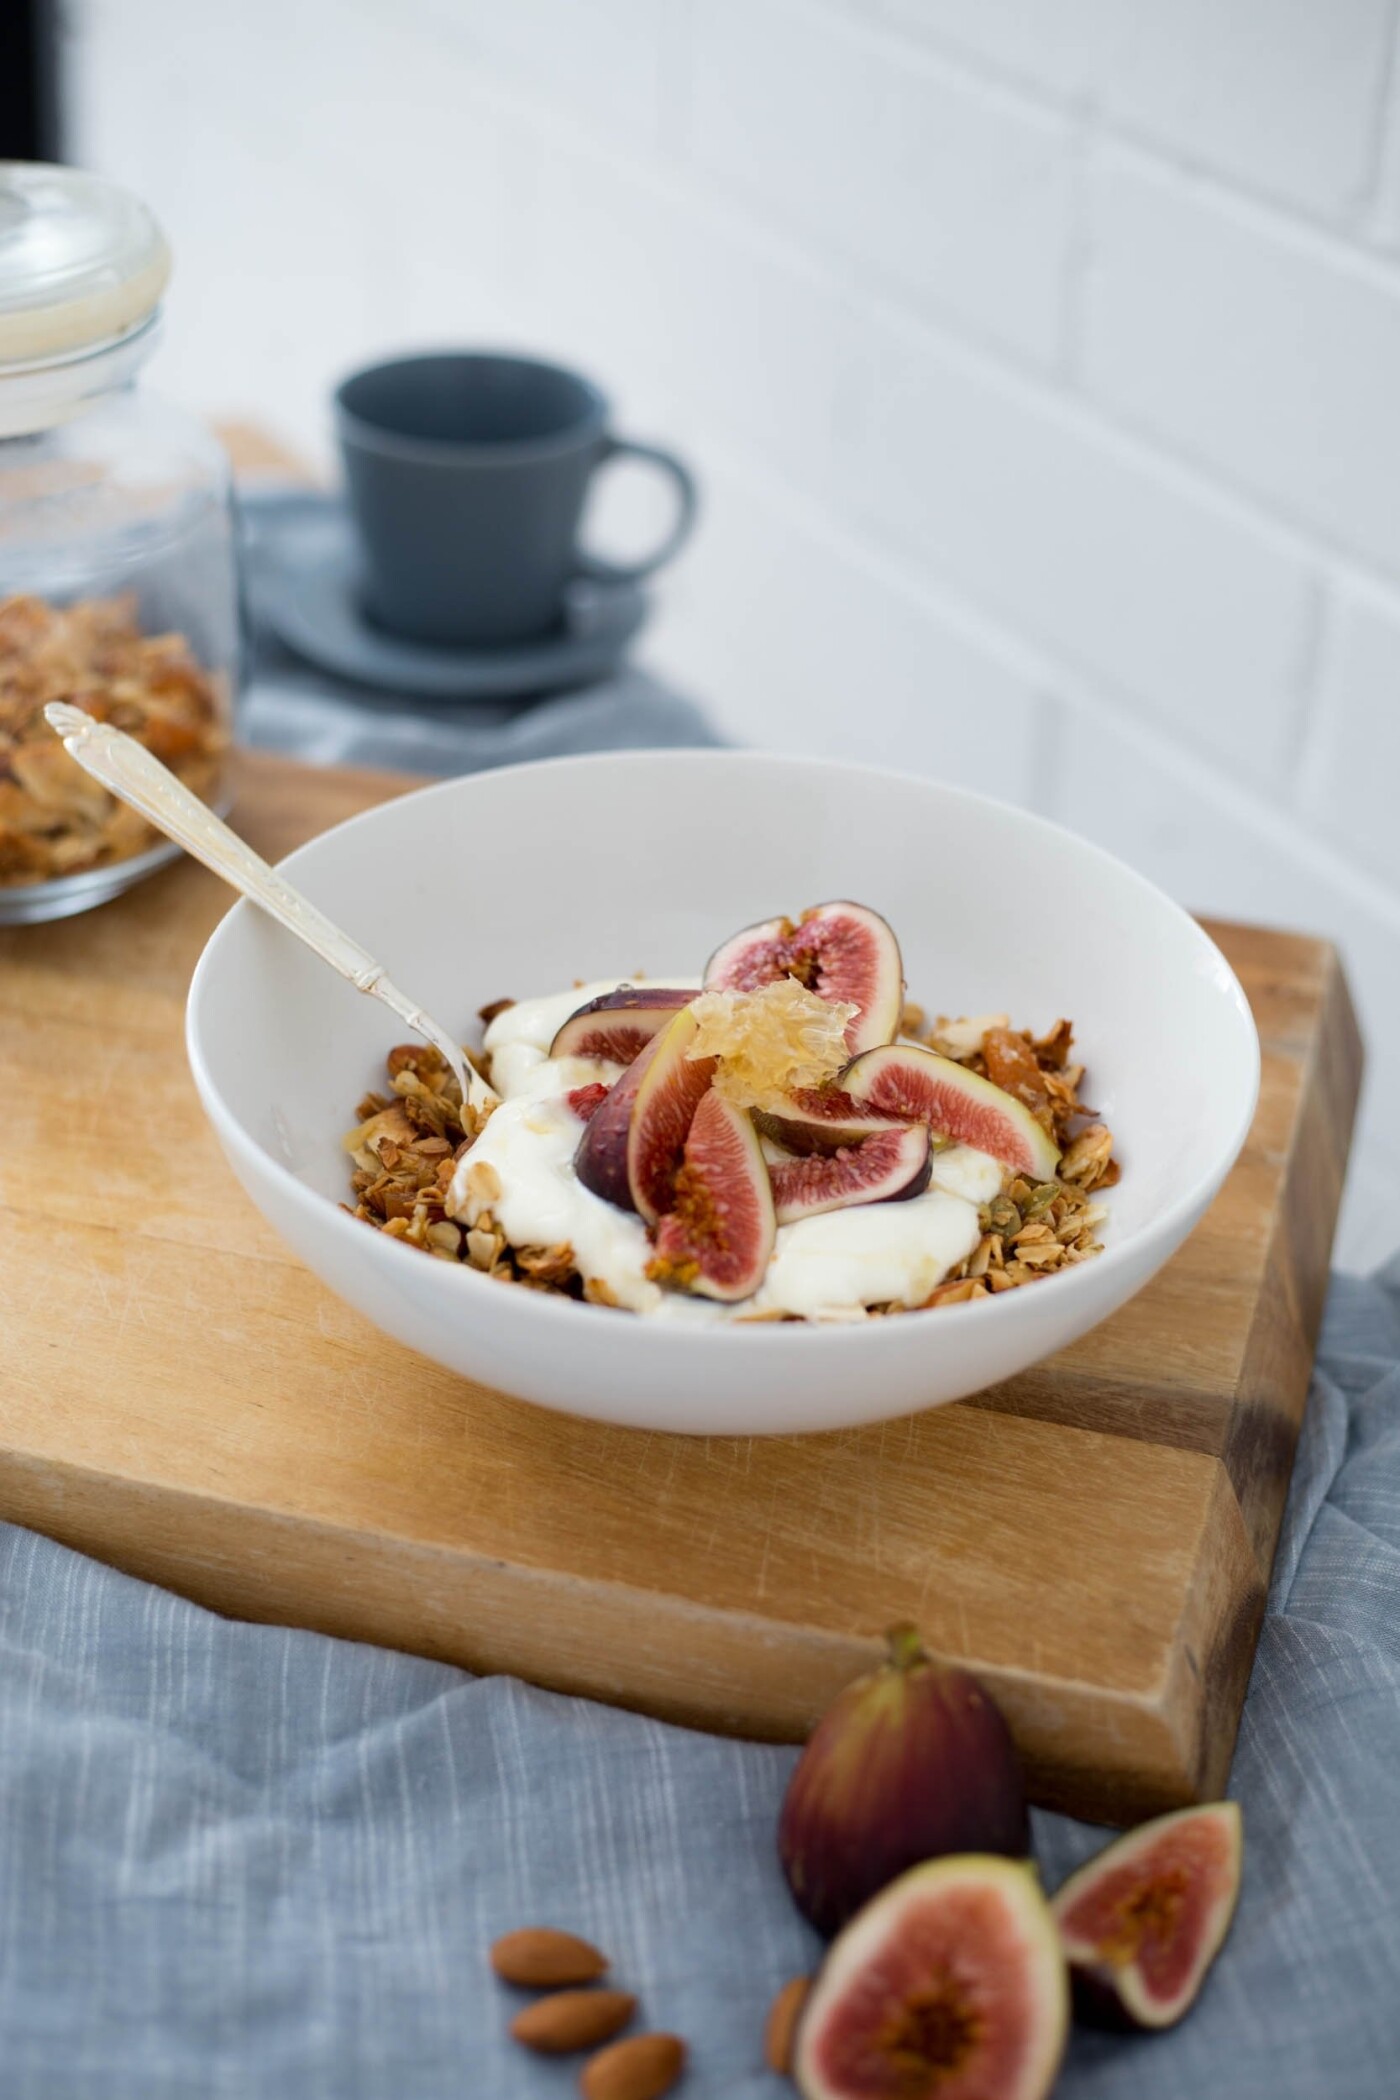 I think my favourite season of the year is fig season. Fresh figs work perfectly in salads, baked goods and your morning breakfast. The recipe is a lightly toasted muesli with a selection of nuts, dried fruit, coconut and cinnamon spice.